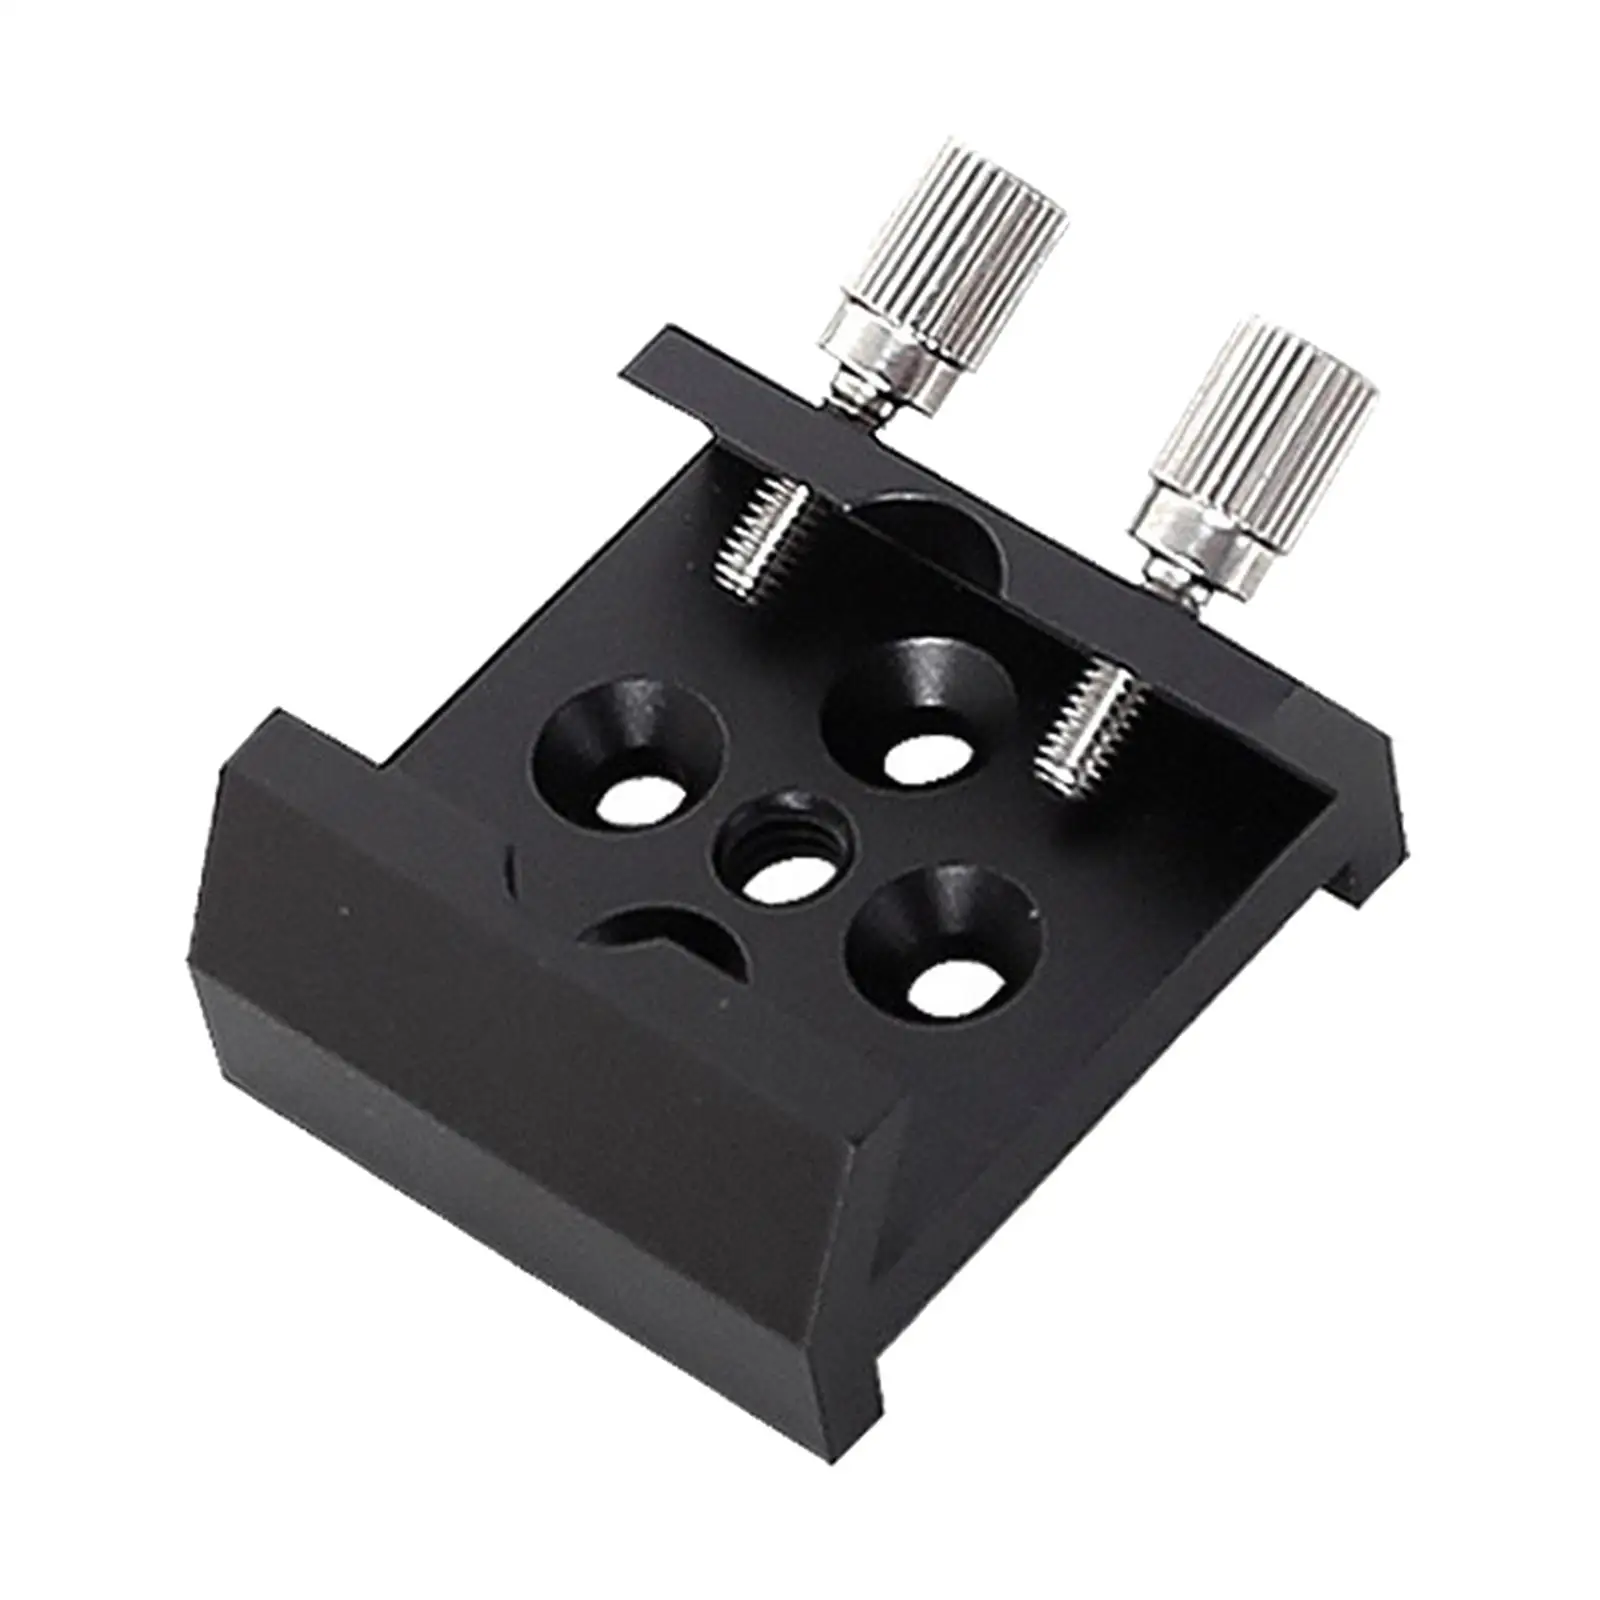 Dovetail base for telescope finder scope replaces long-lasting ones